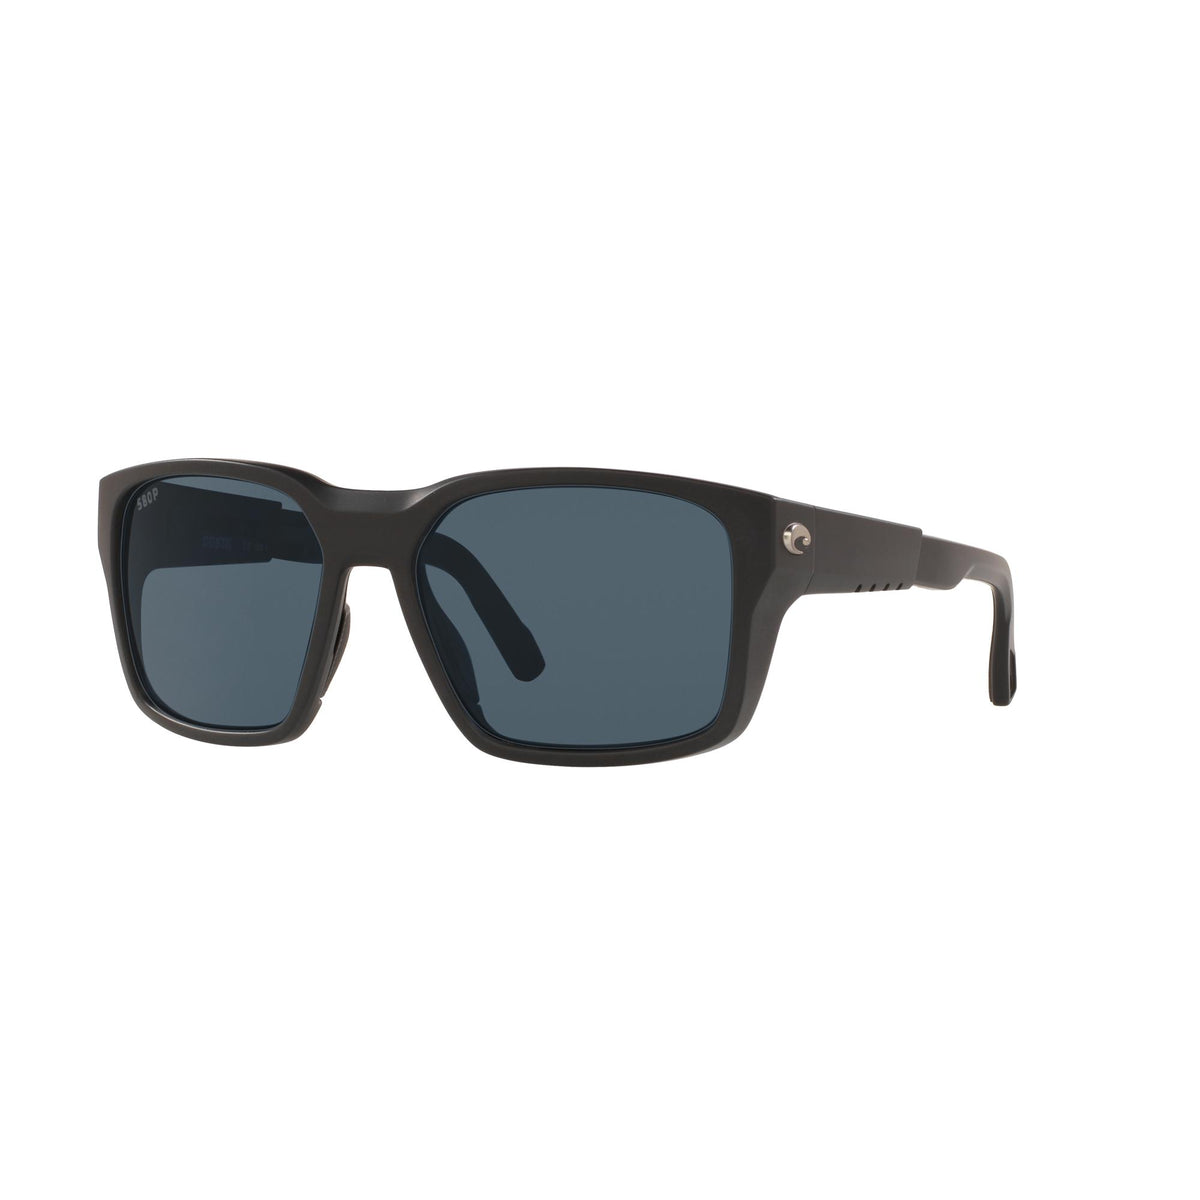 View of Sunglasses Costa Tailwalker Matte Black Gray 580P available at EZOKO Pike and Musky Shop